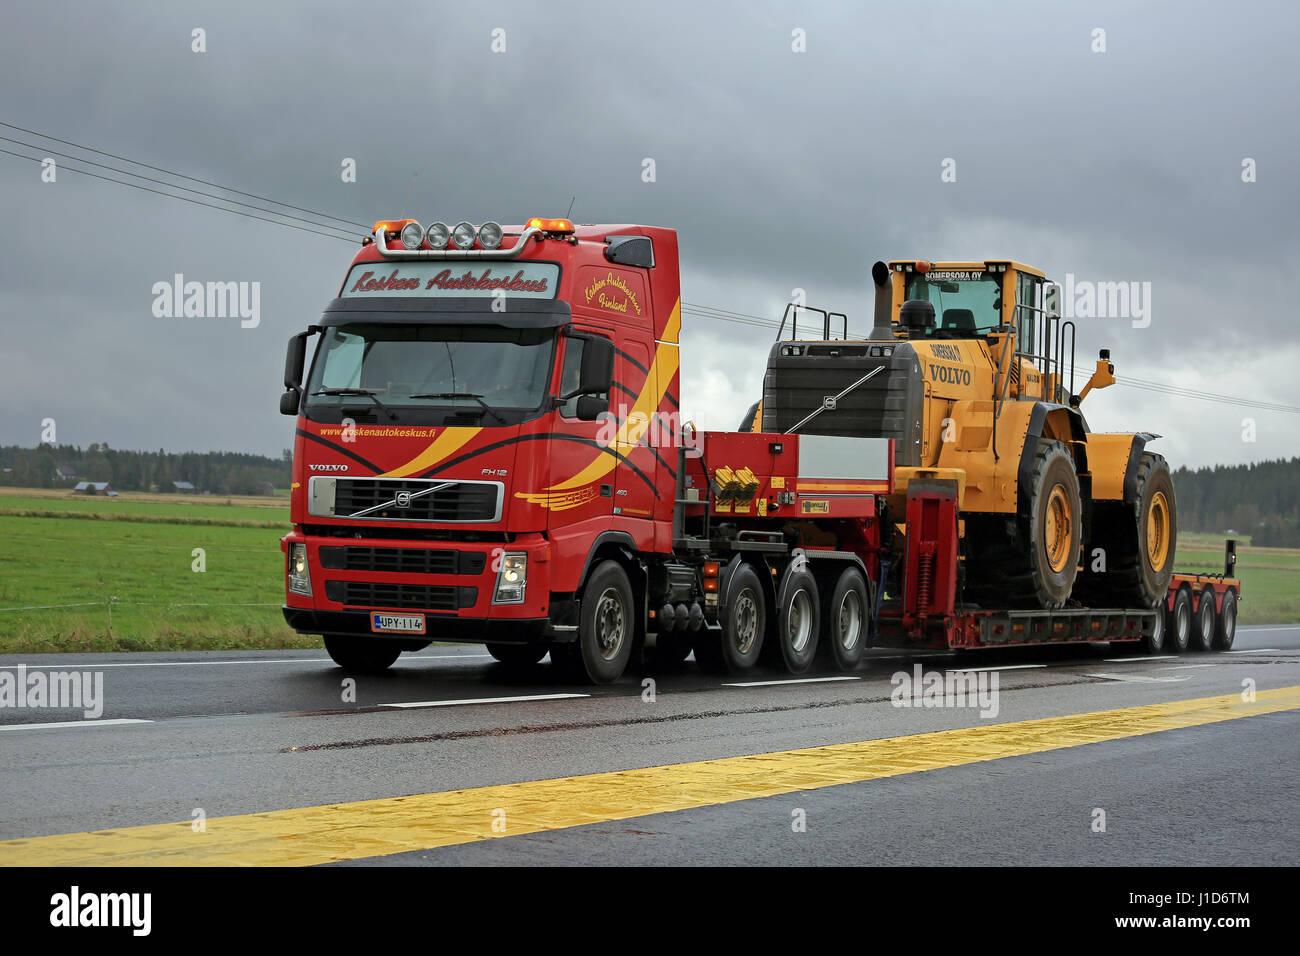 FORSSA, FINLAND - SEPTEMBER 4, 2016: Red Volvo FH12 semi truck transports Volvo wheel loader as oversize load along highway on a rainy day. Stock Photo